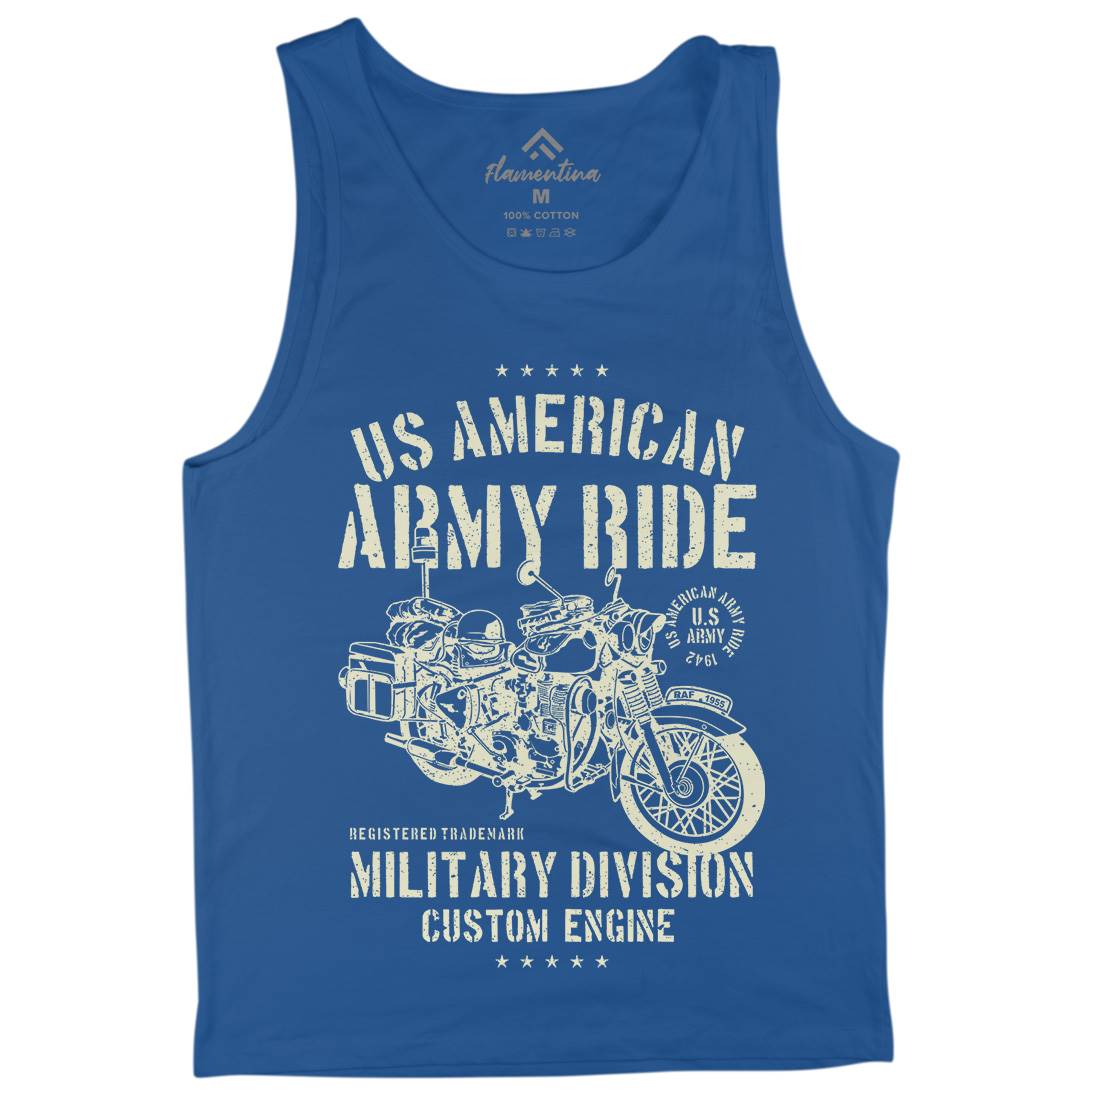 Ride Mens Tank Top Vest Army A613